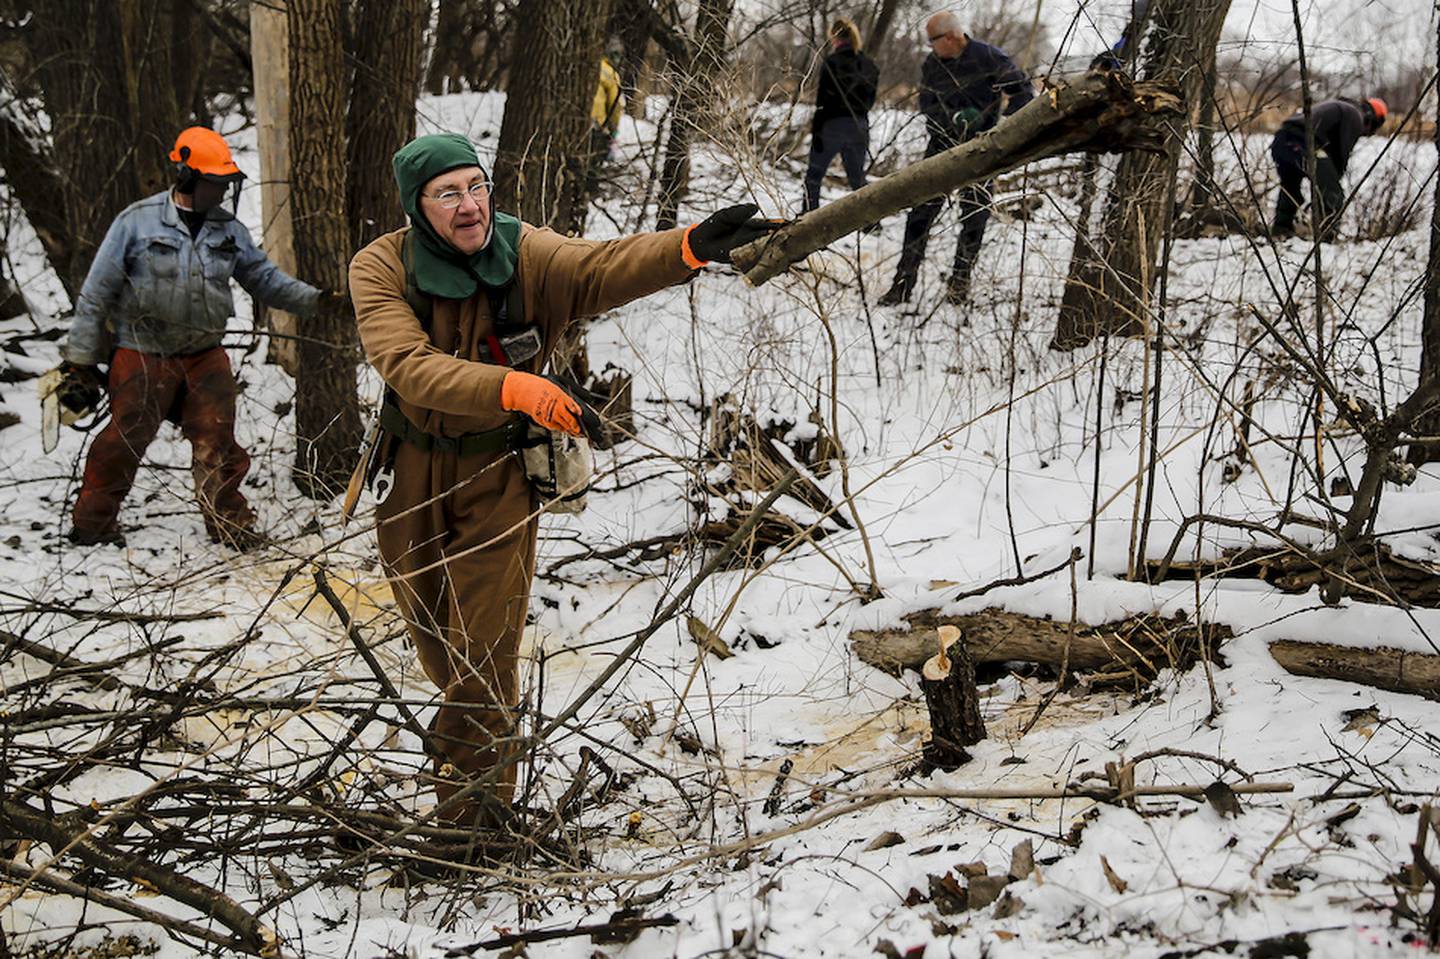 Dave Wendt of Joliet tosses a log as he volunteers at the Rock Run Forest Preserve in Joliet on Monday. Volunteers helped remove brush as part of the Martin Luther King Jr. Day of Service.